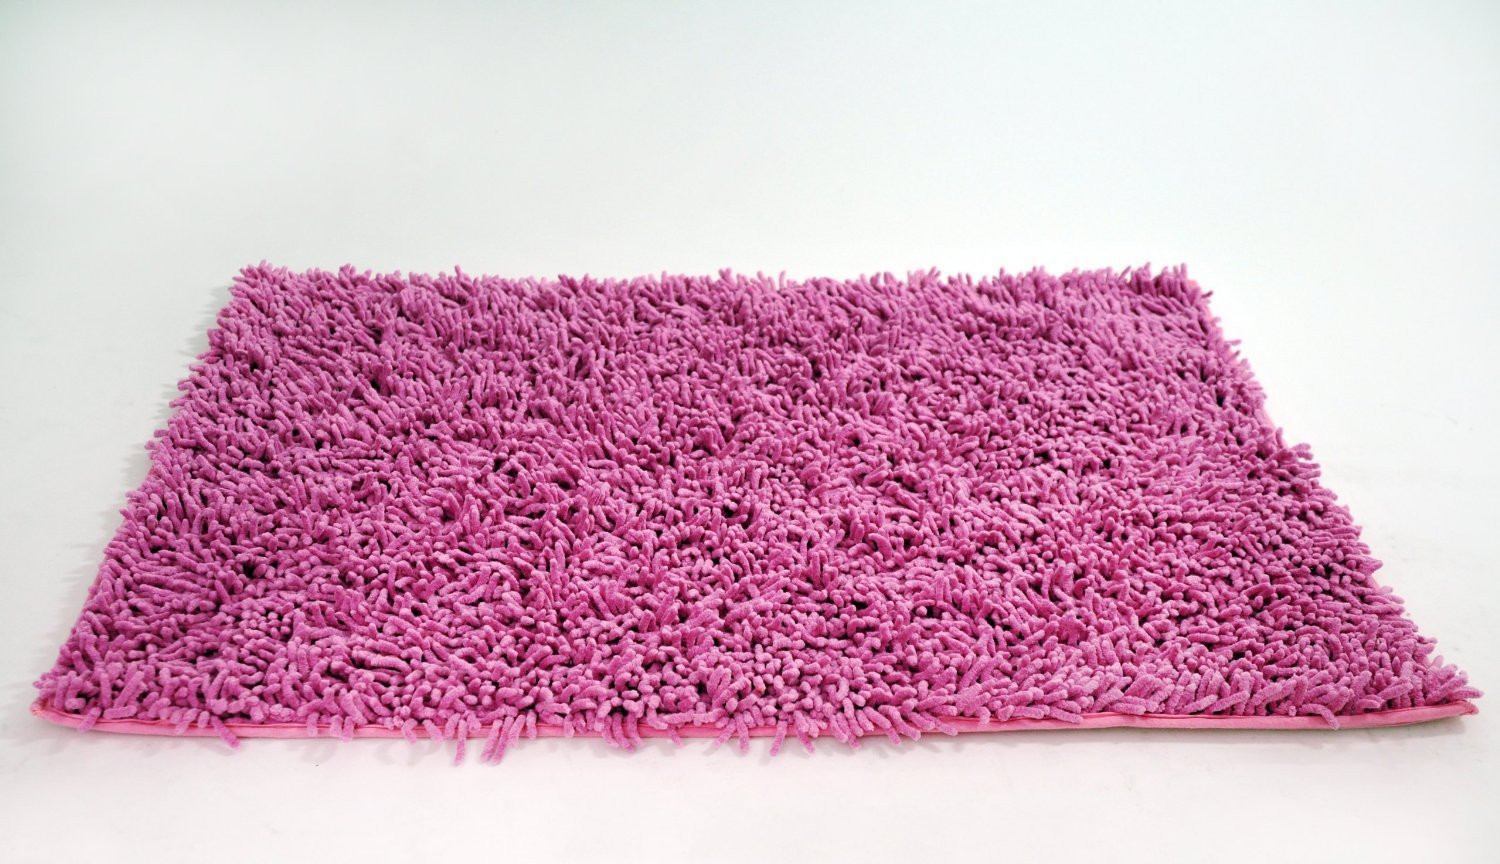 A pink chenille cotton shag bathroom rug. The rug is plush and fluffy, with an anti-slip backing to prevent slips and falls in the shower or tub. It is an absorbent bath mat that quickly soaks up water to keep bathroom floors dry. The rug is machine washable and resistant to water and stains. It is a small, soft, and super comfortable rug that adds a girly touch to any bathroom decor.